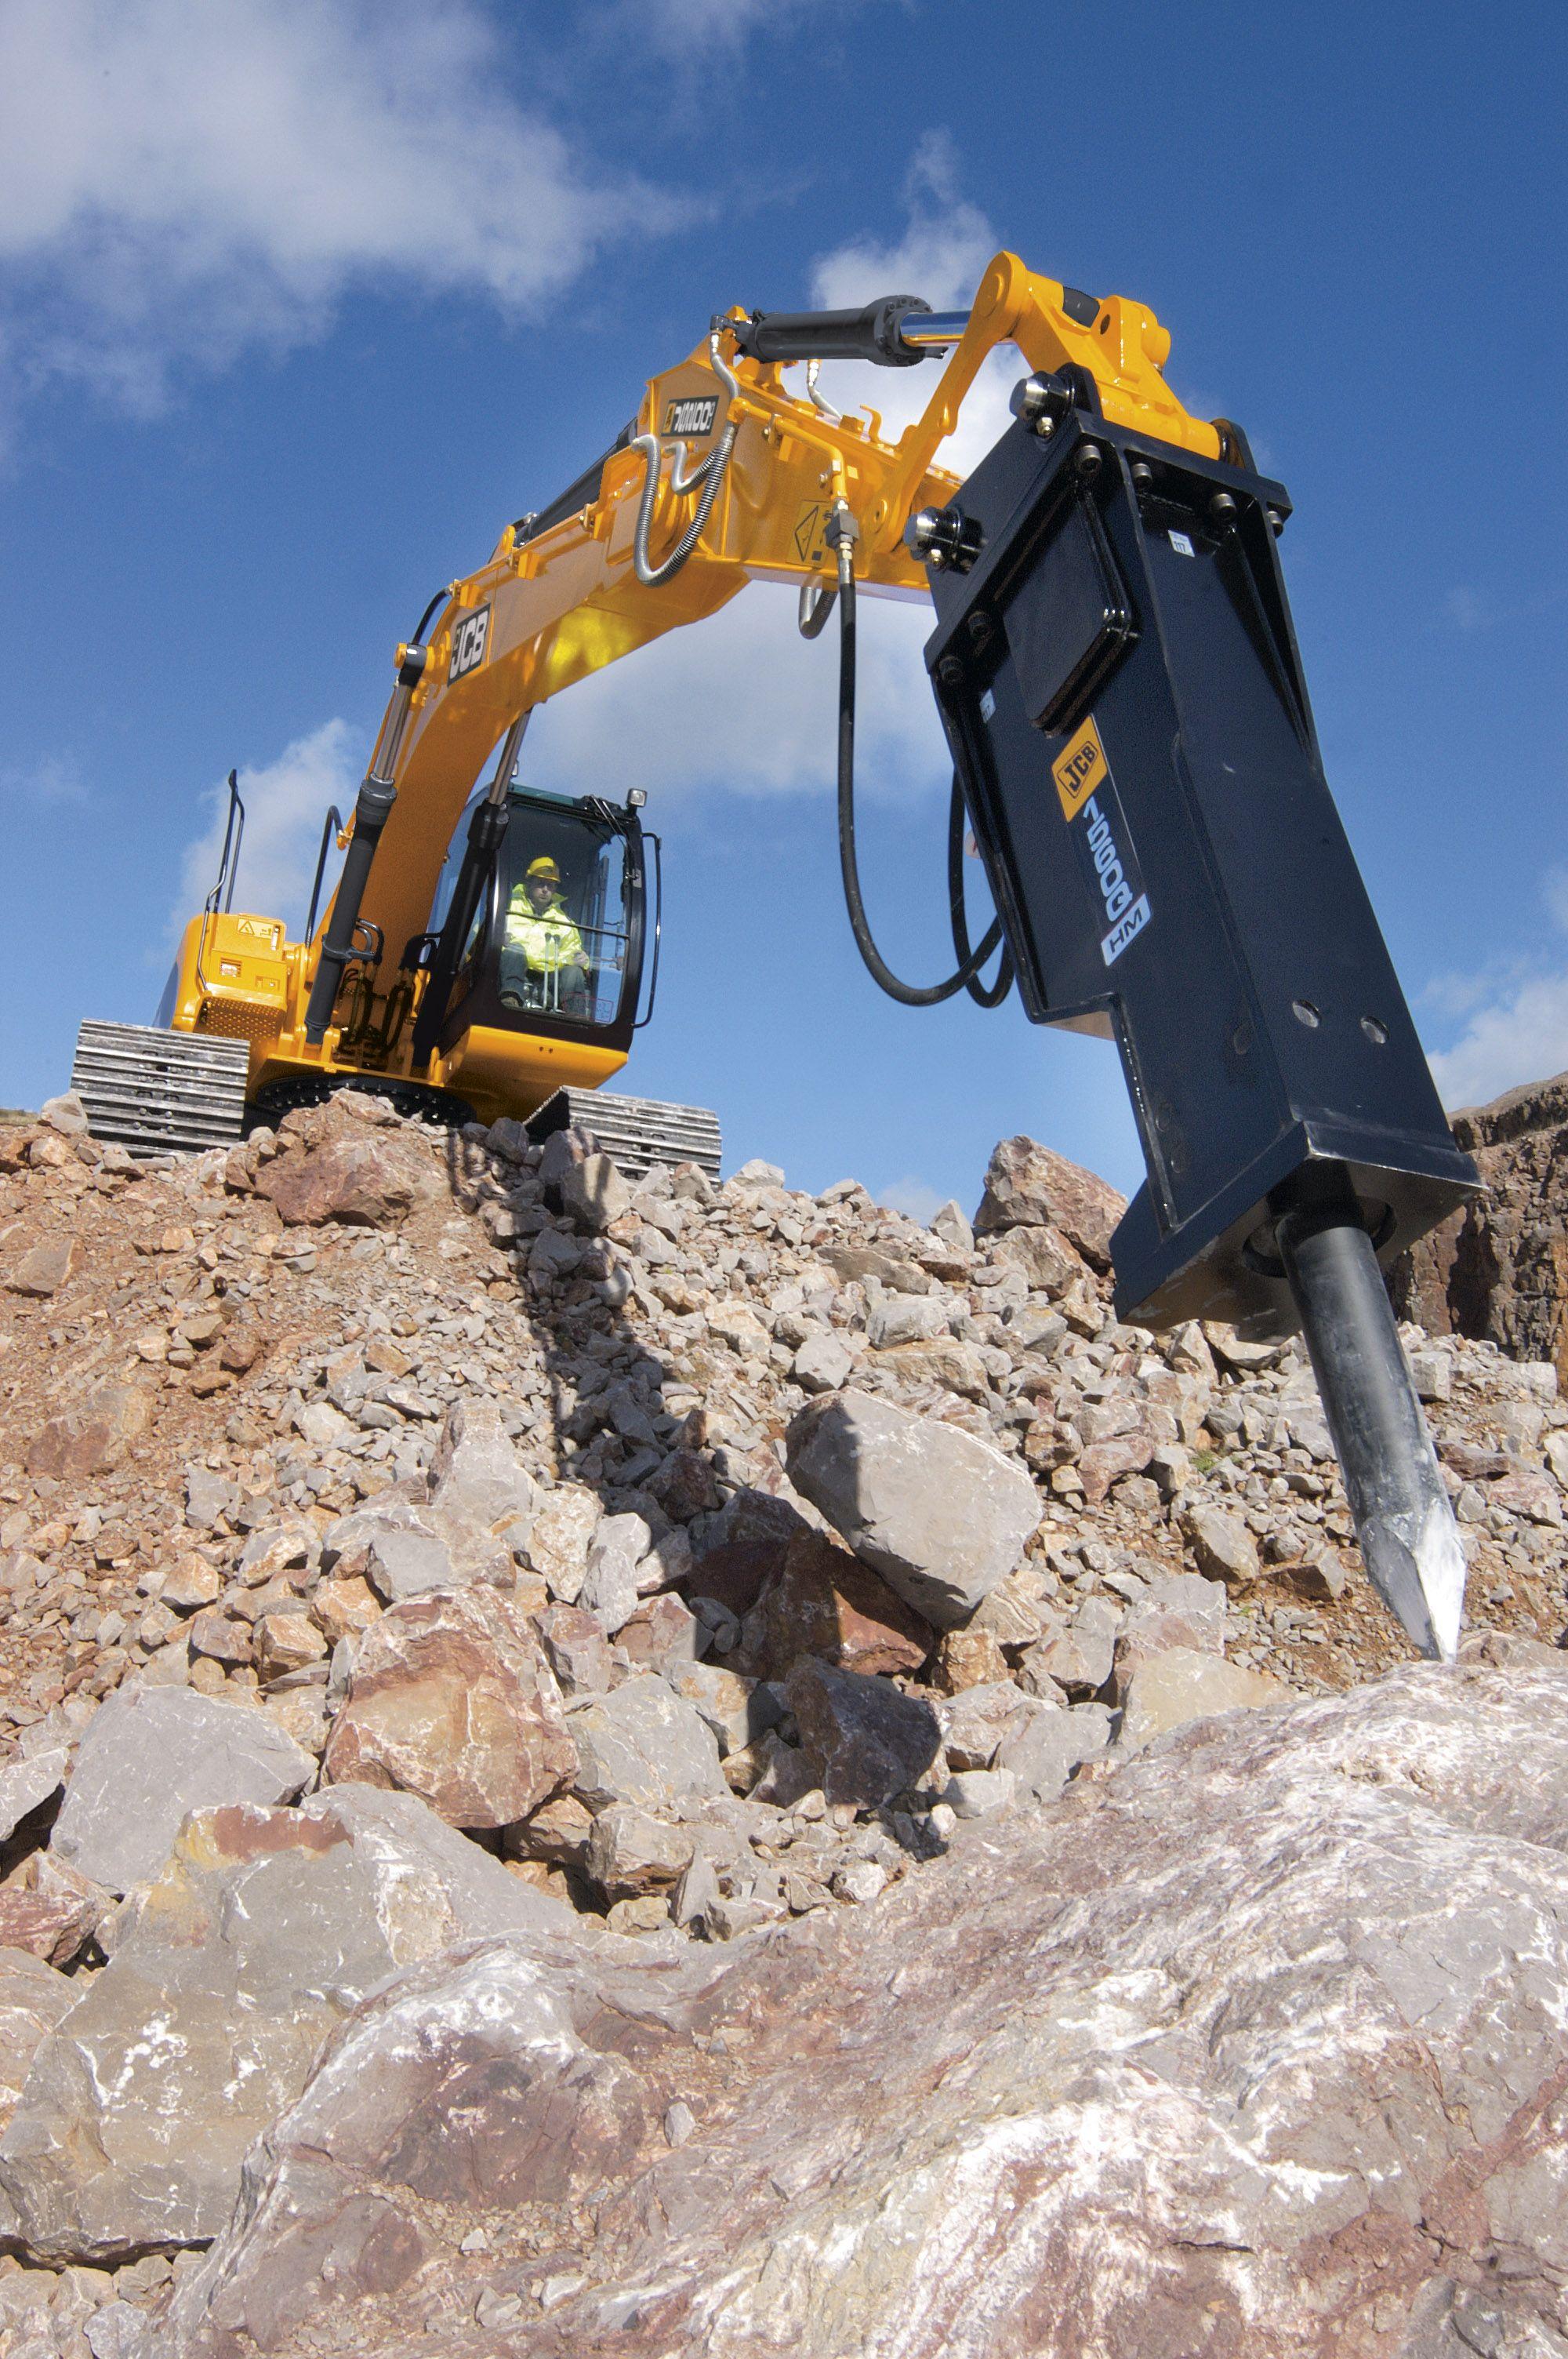 Excavator production underway at JCB's latest factory